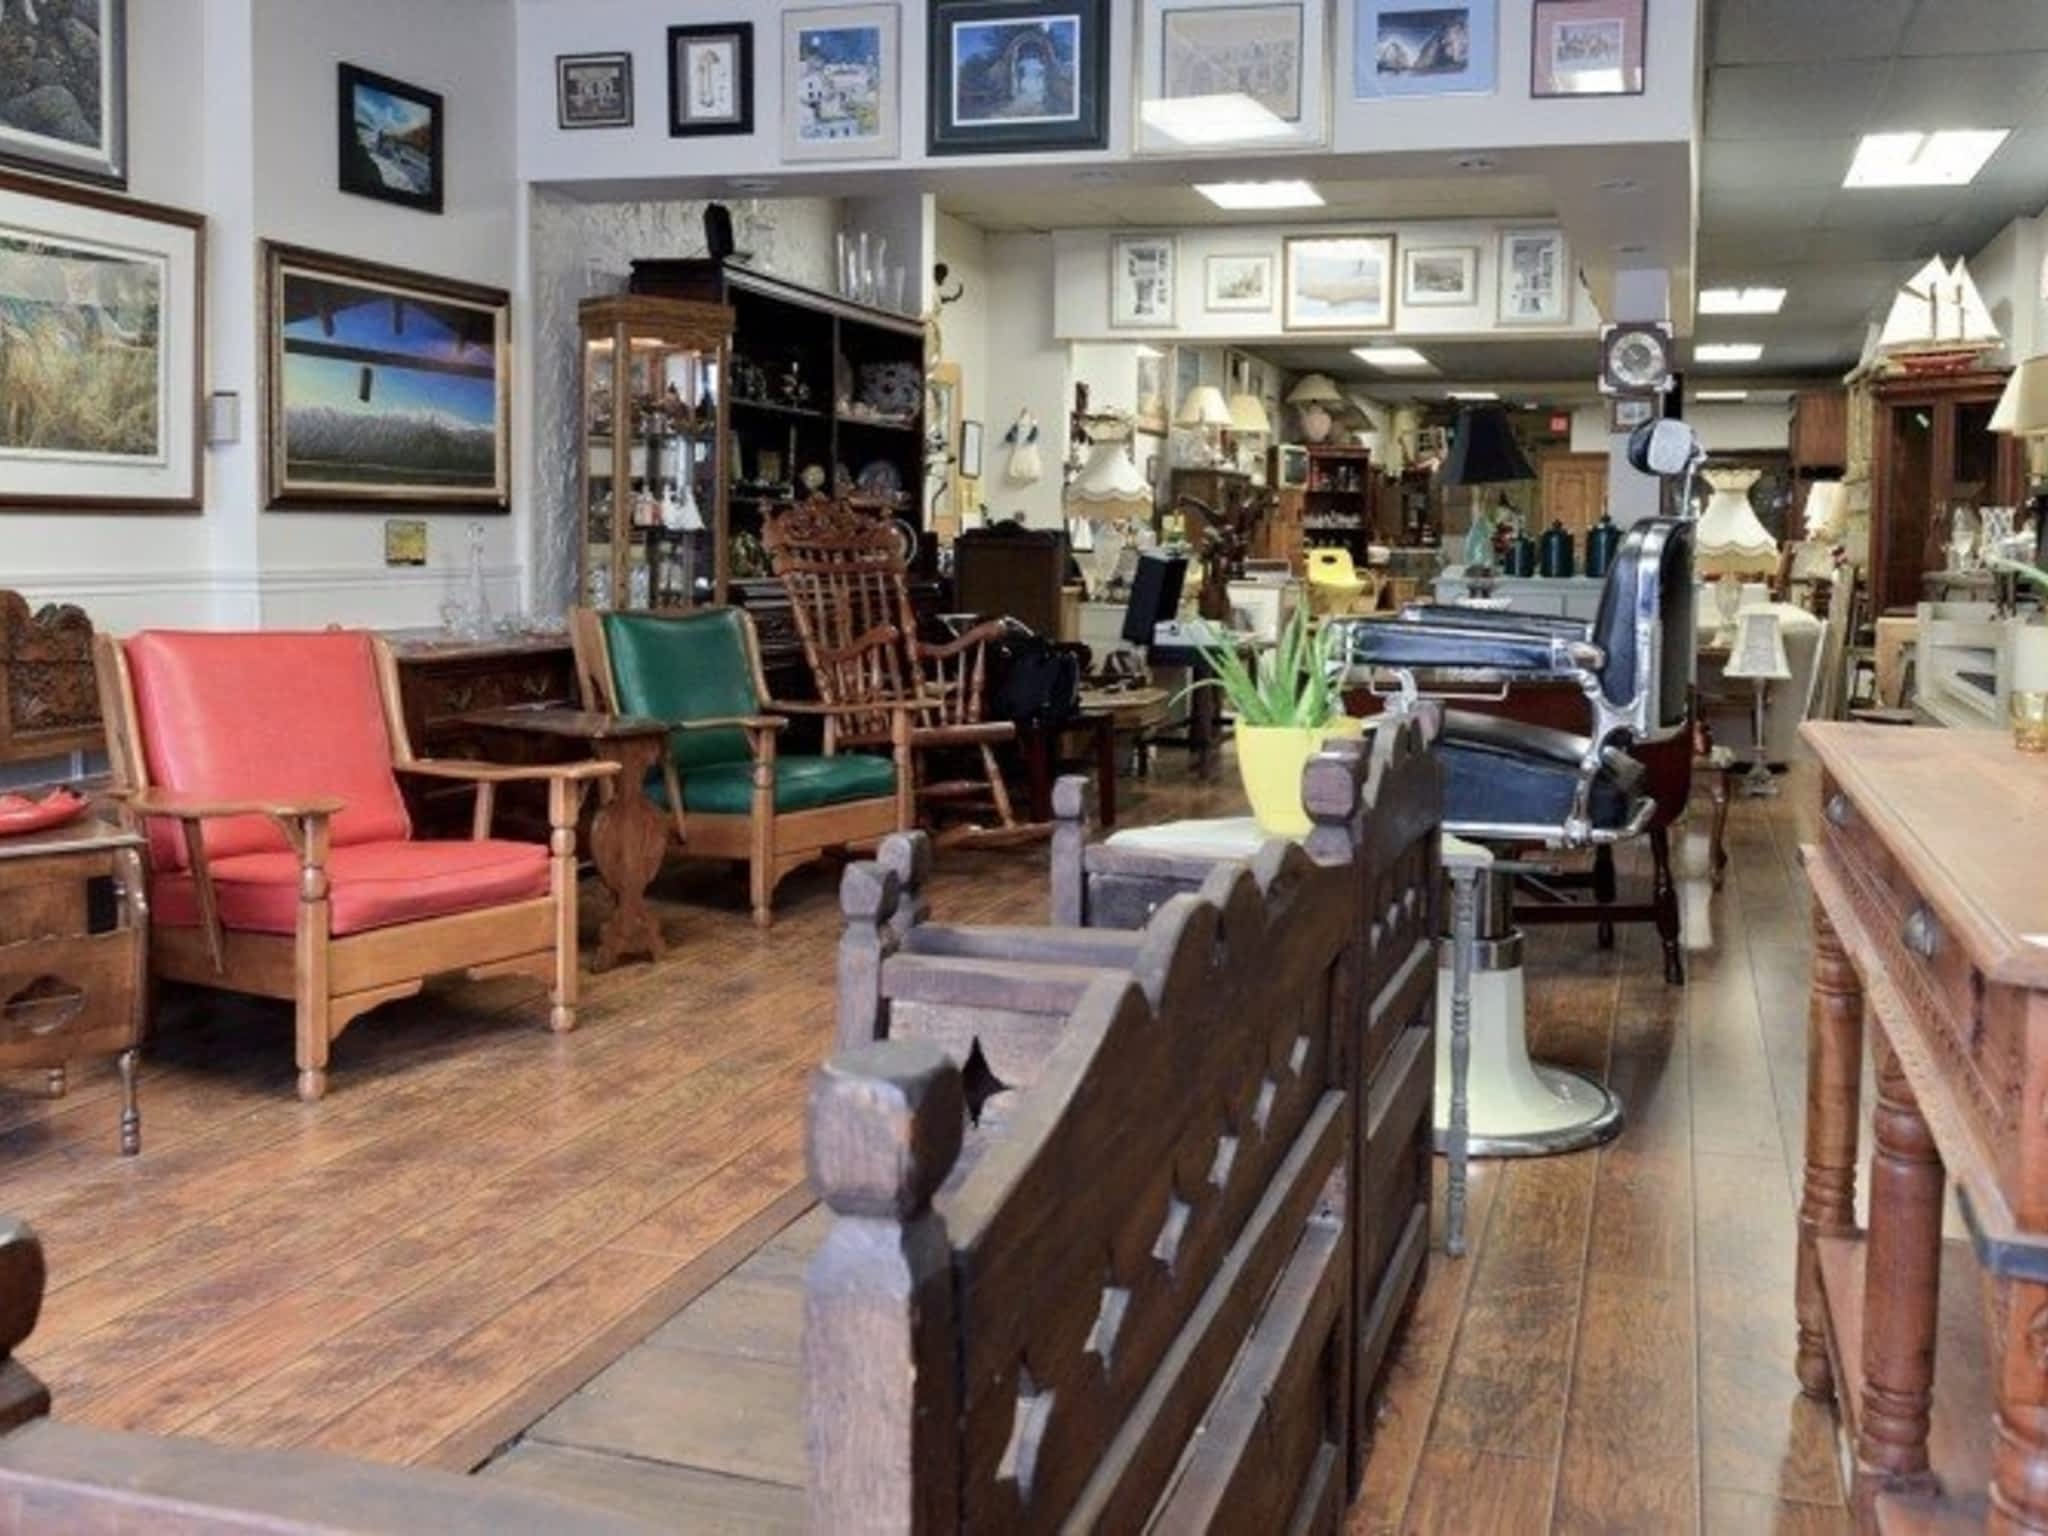 photo East Lynn Antiques & Collectables